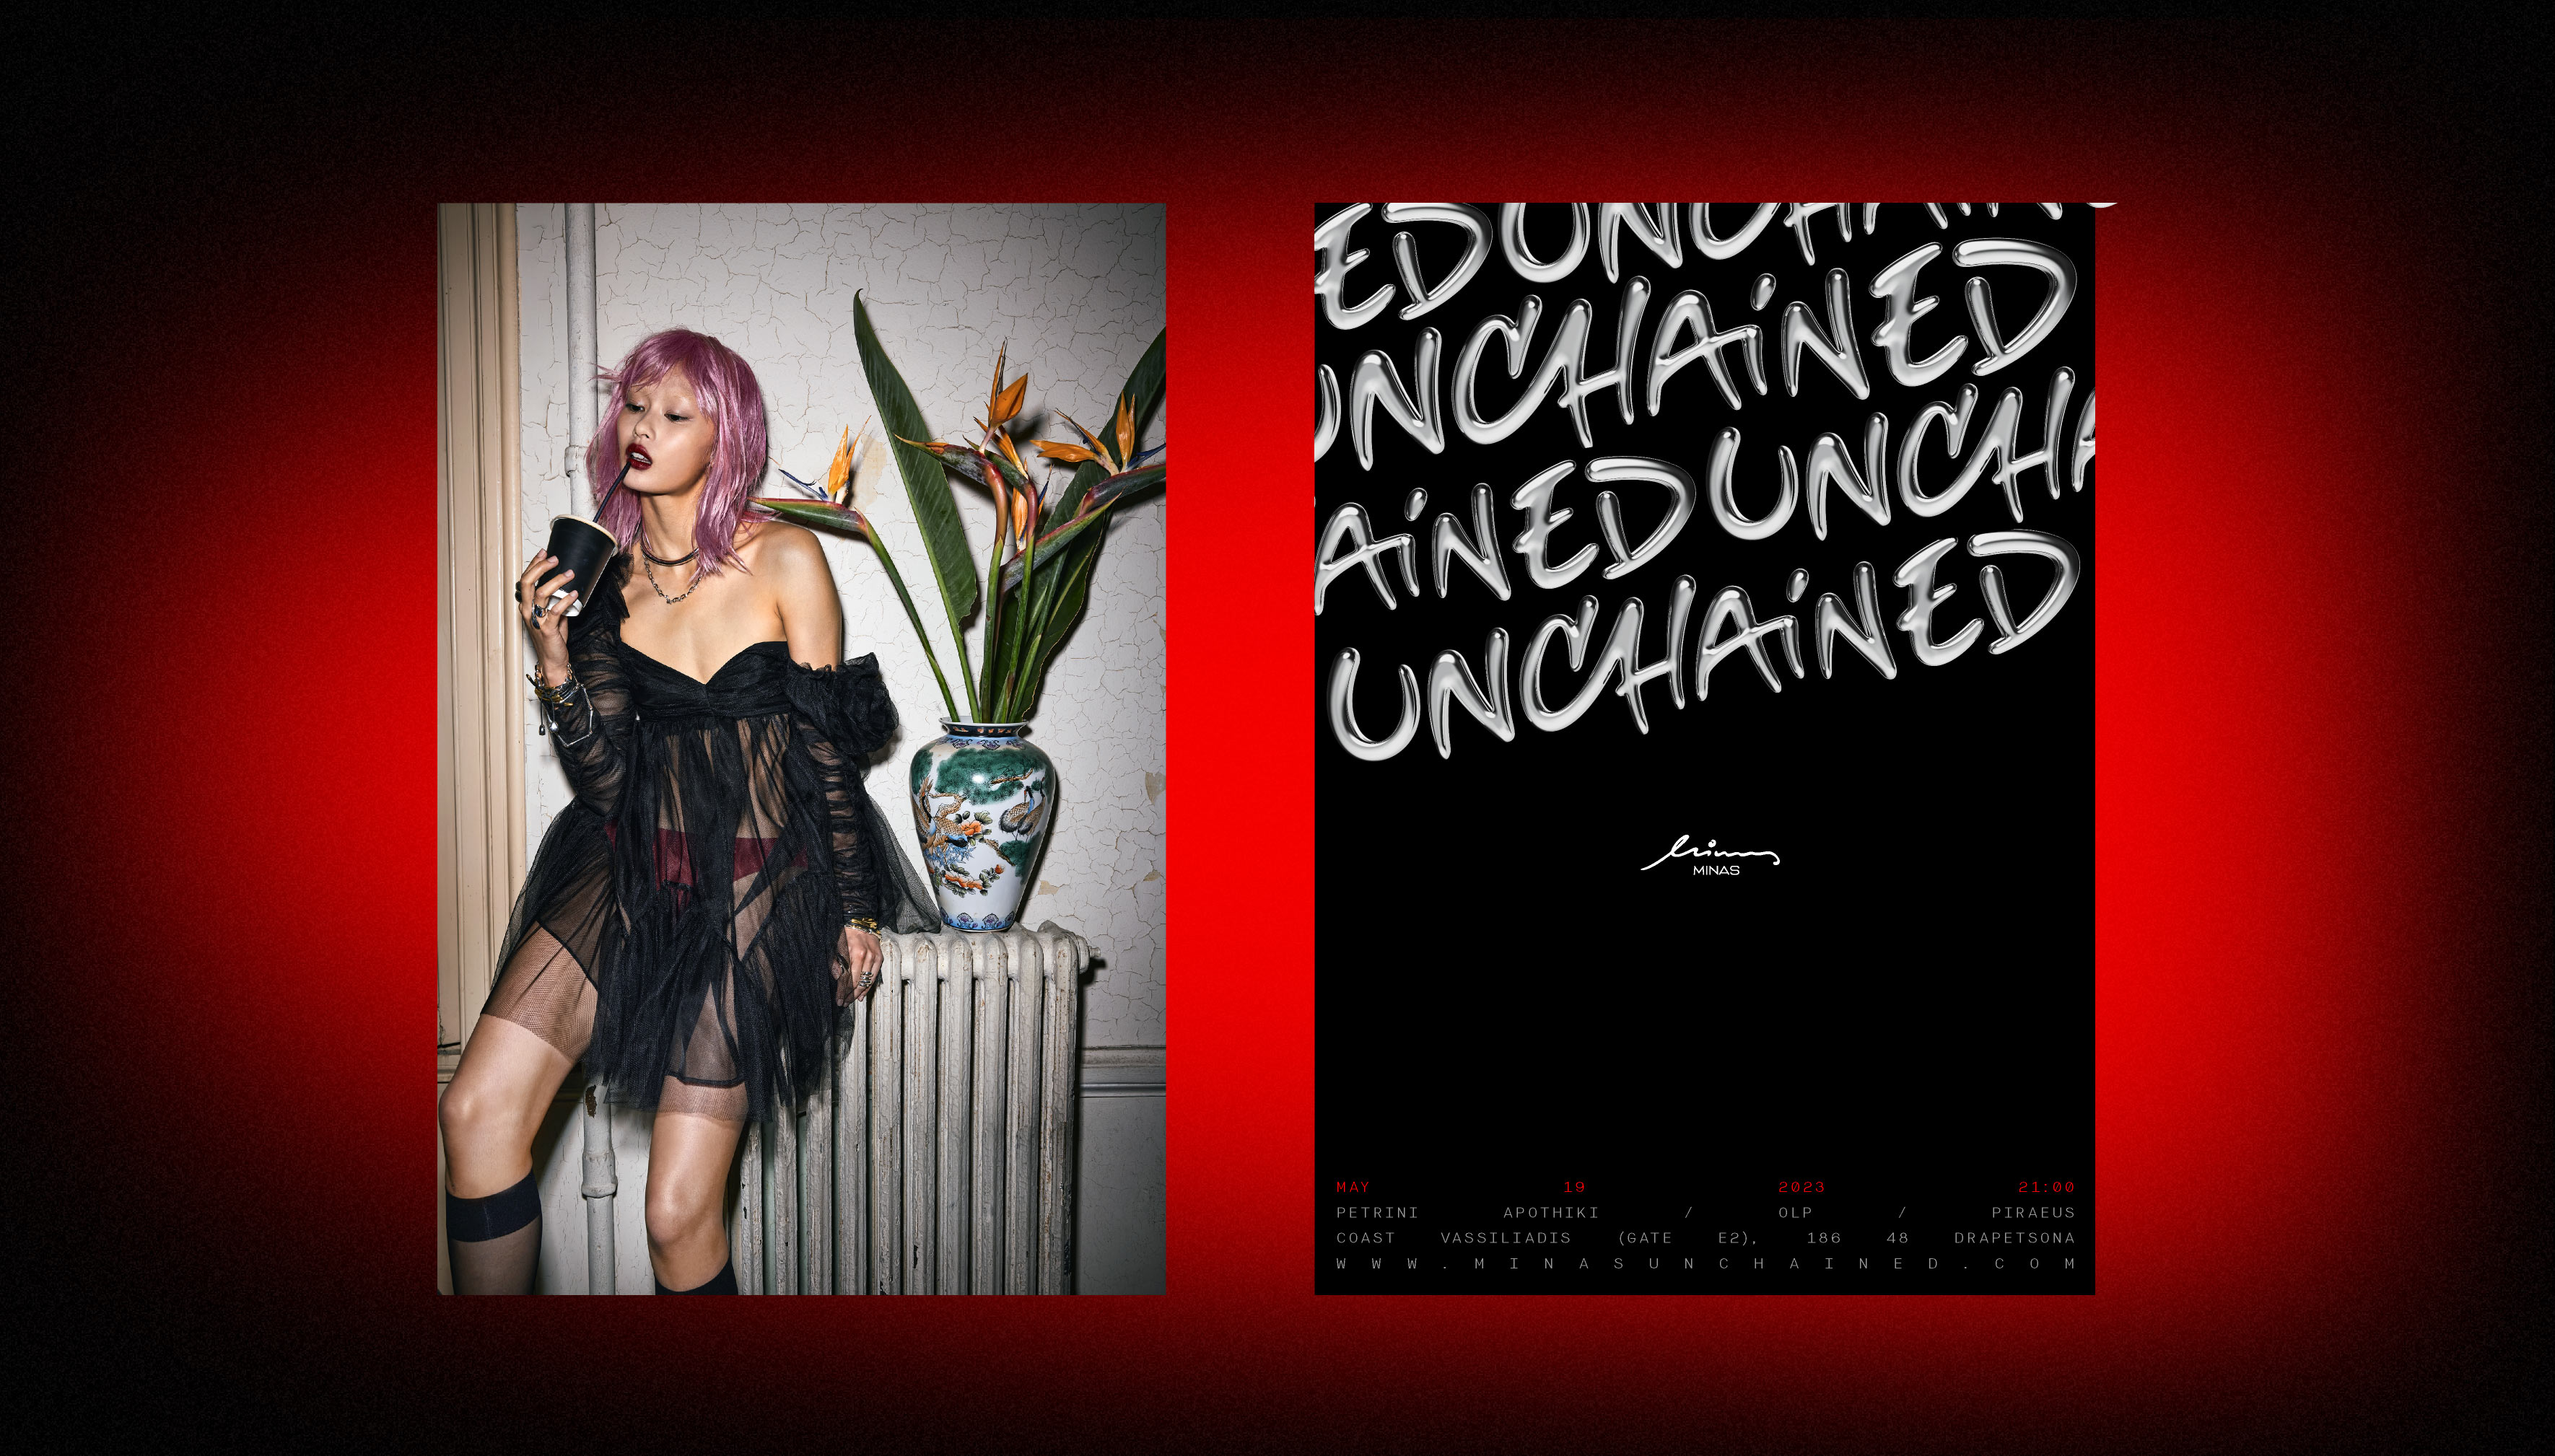 Minas Unchained branding typography poster and woman kommigraphics